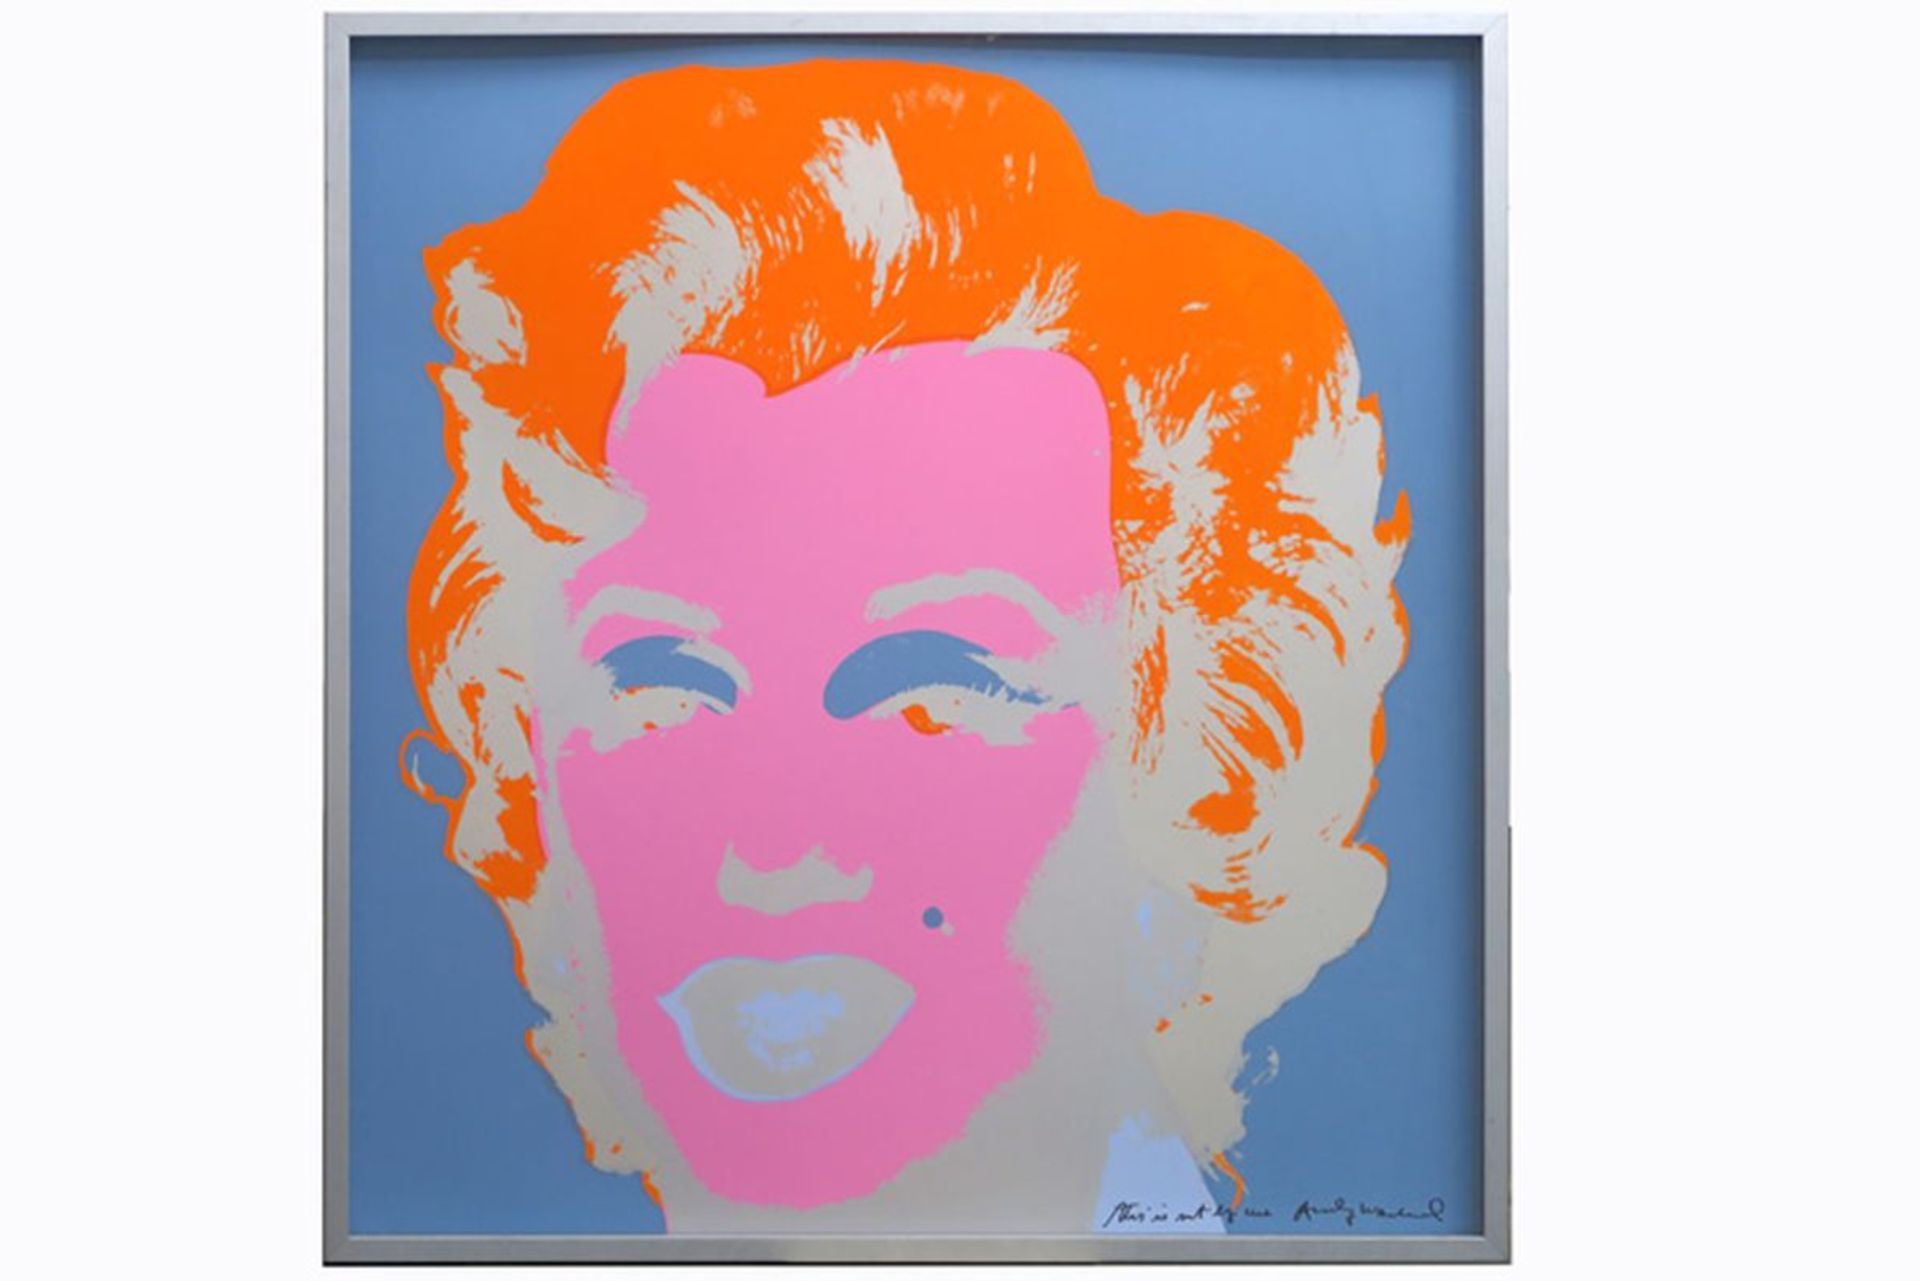 special "Sunday B Morning" version (ca 1970) of the "Marilyn" screenprint on which [...]